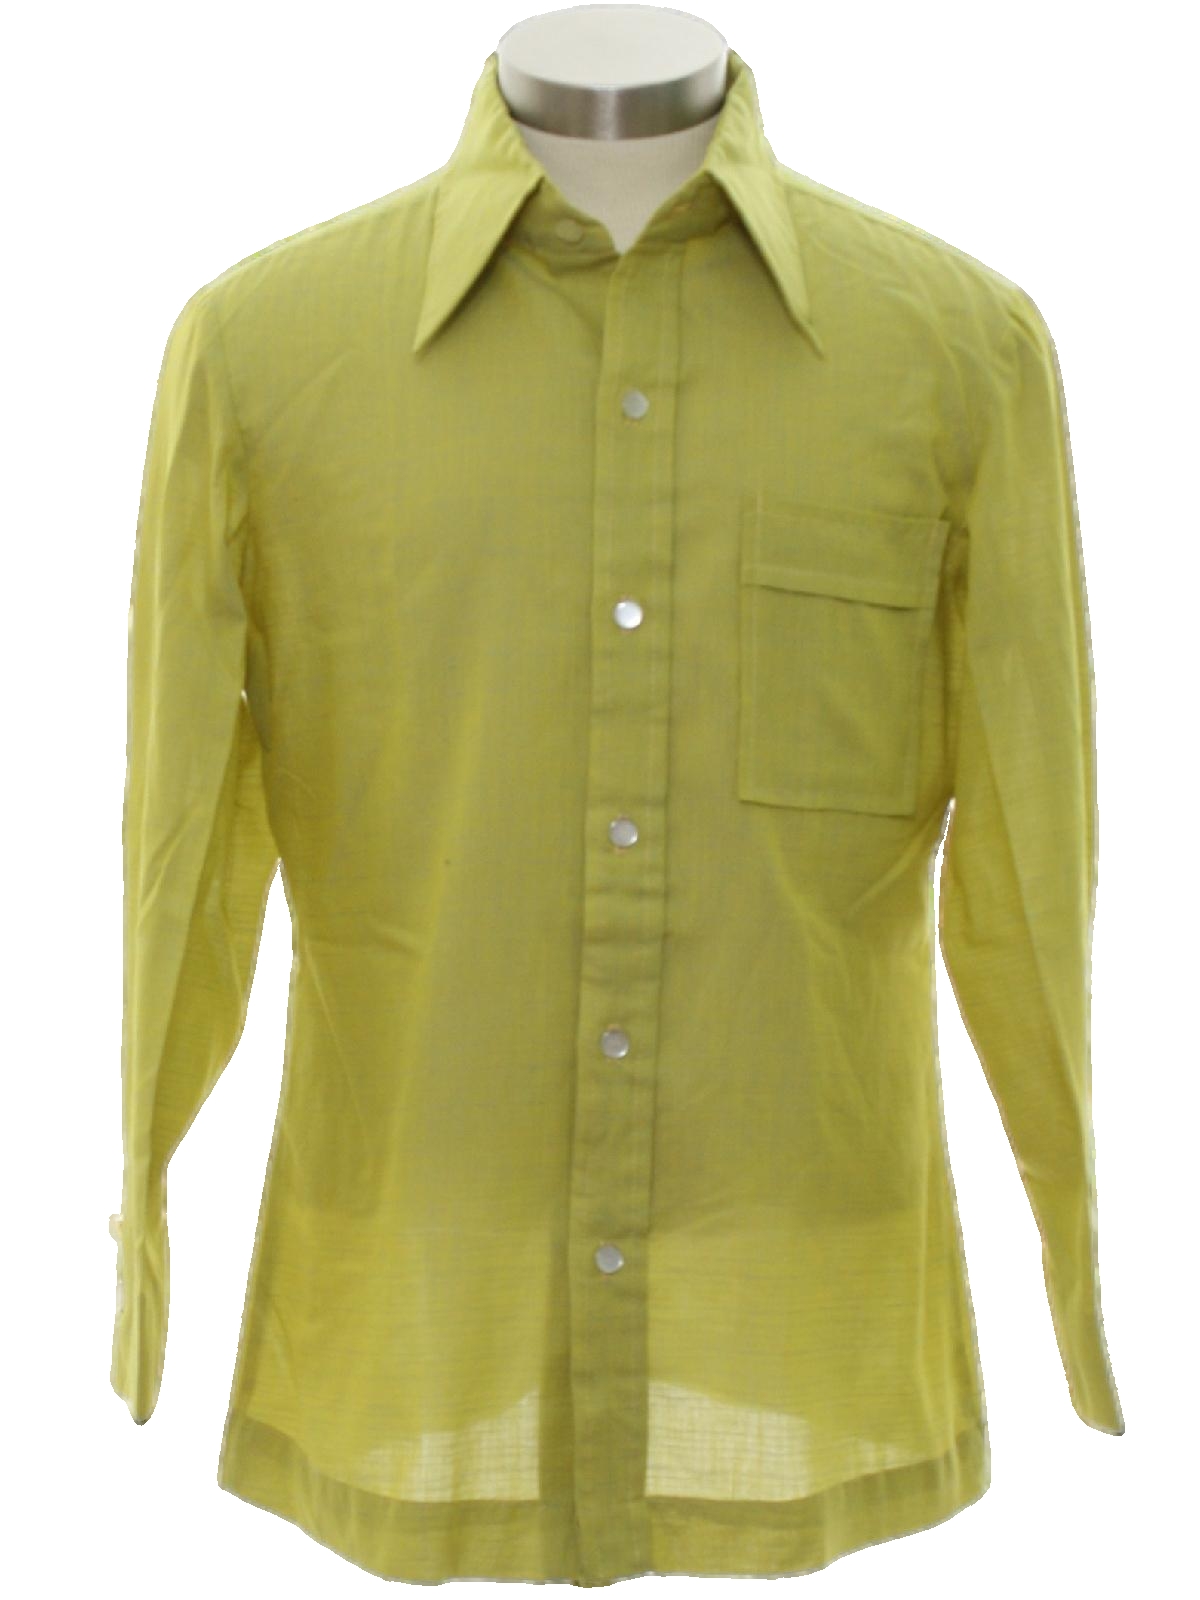 Seventies Missing Label Shirt: 70s -Missing Label- Boys chartreuse with ...